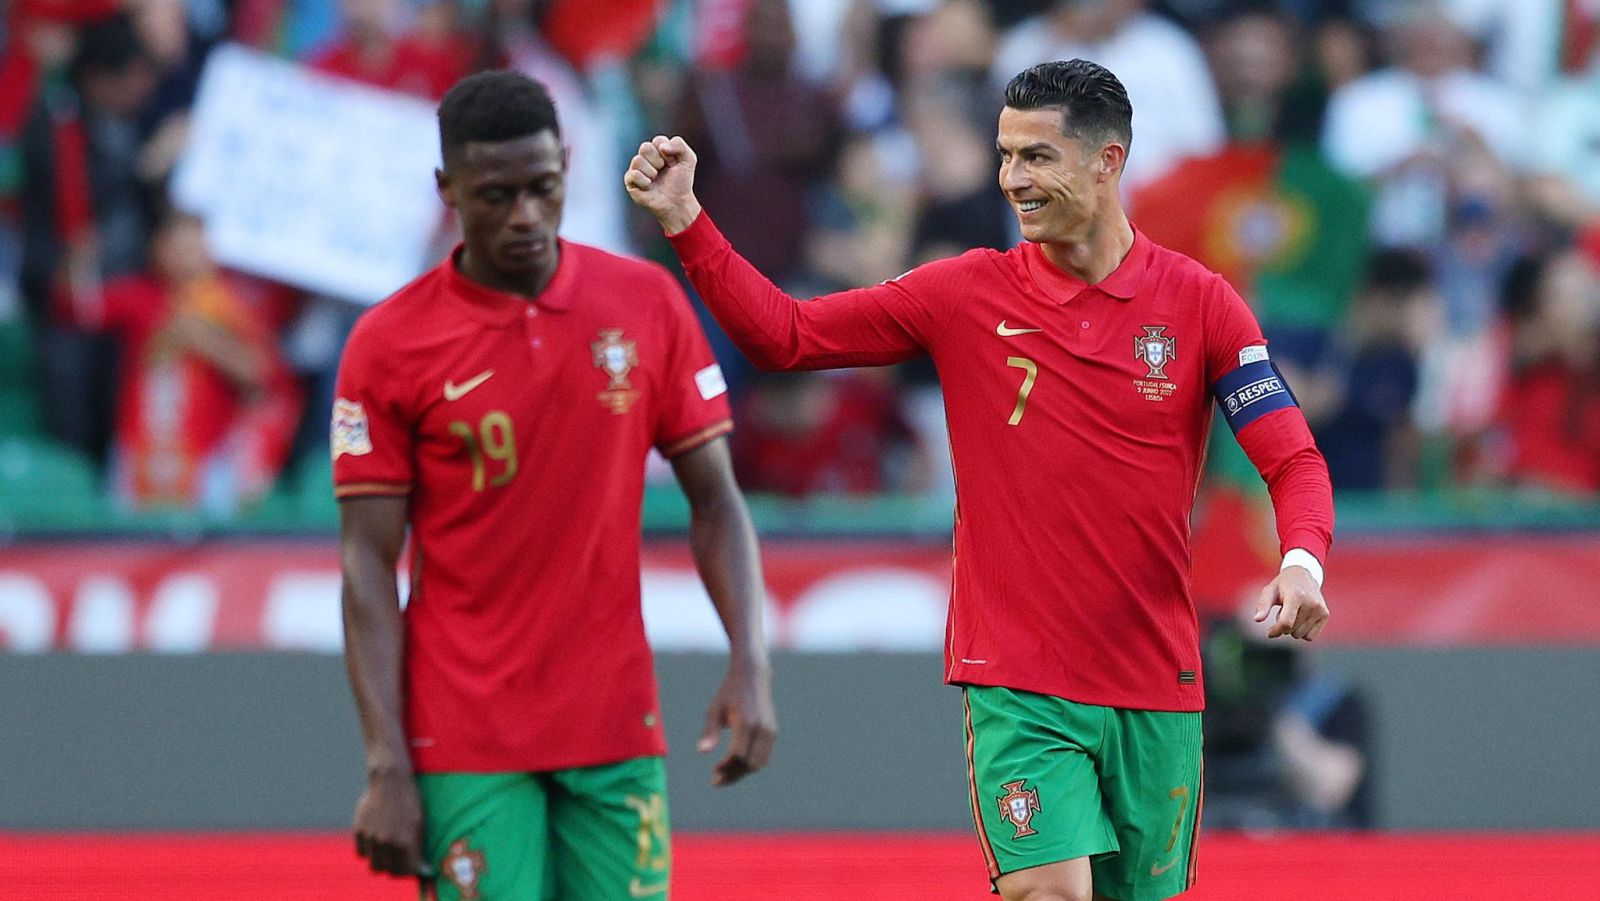 Portugal 4-0 Switzerland (UEFA Nations League) 2022.06.05 (19h45) Full Goals Highlight Ronaldo at the Double